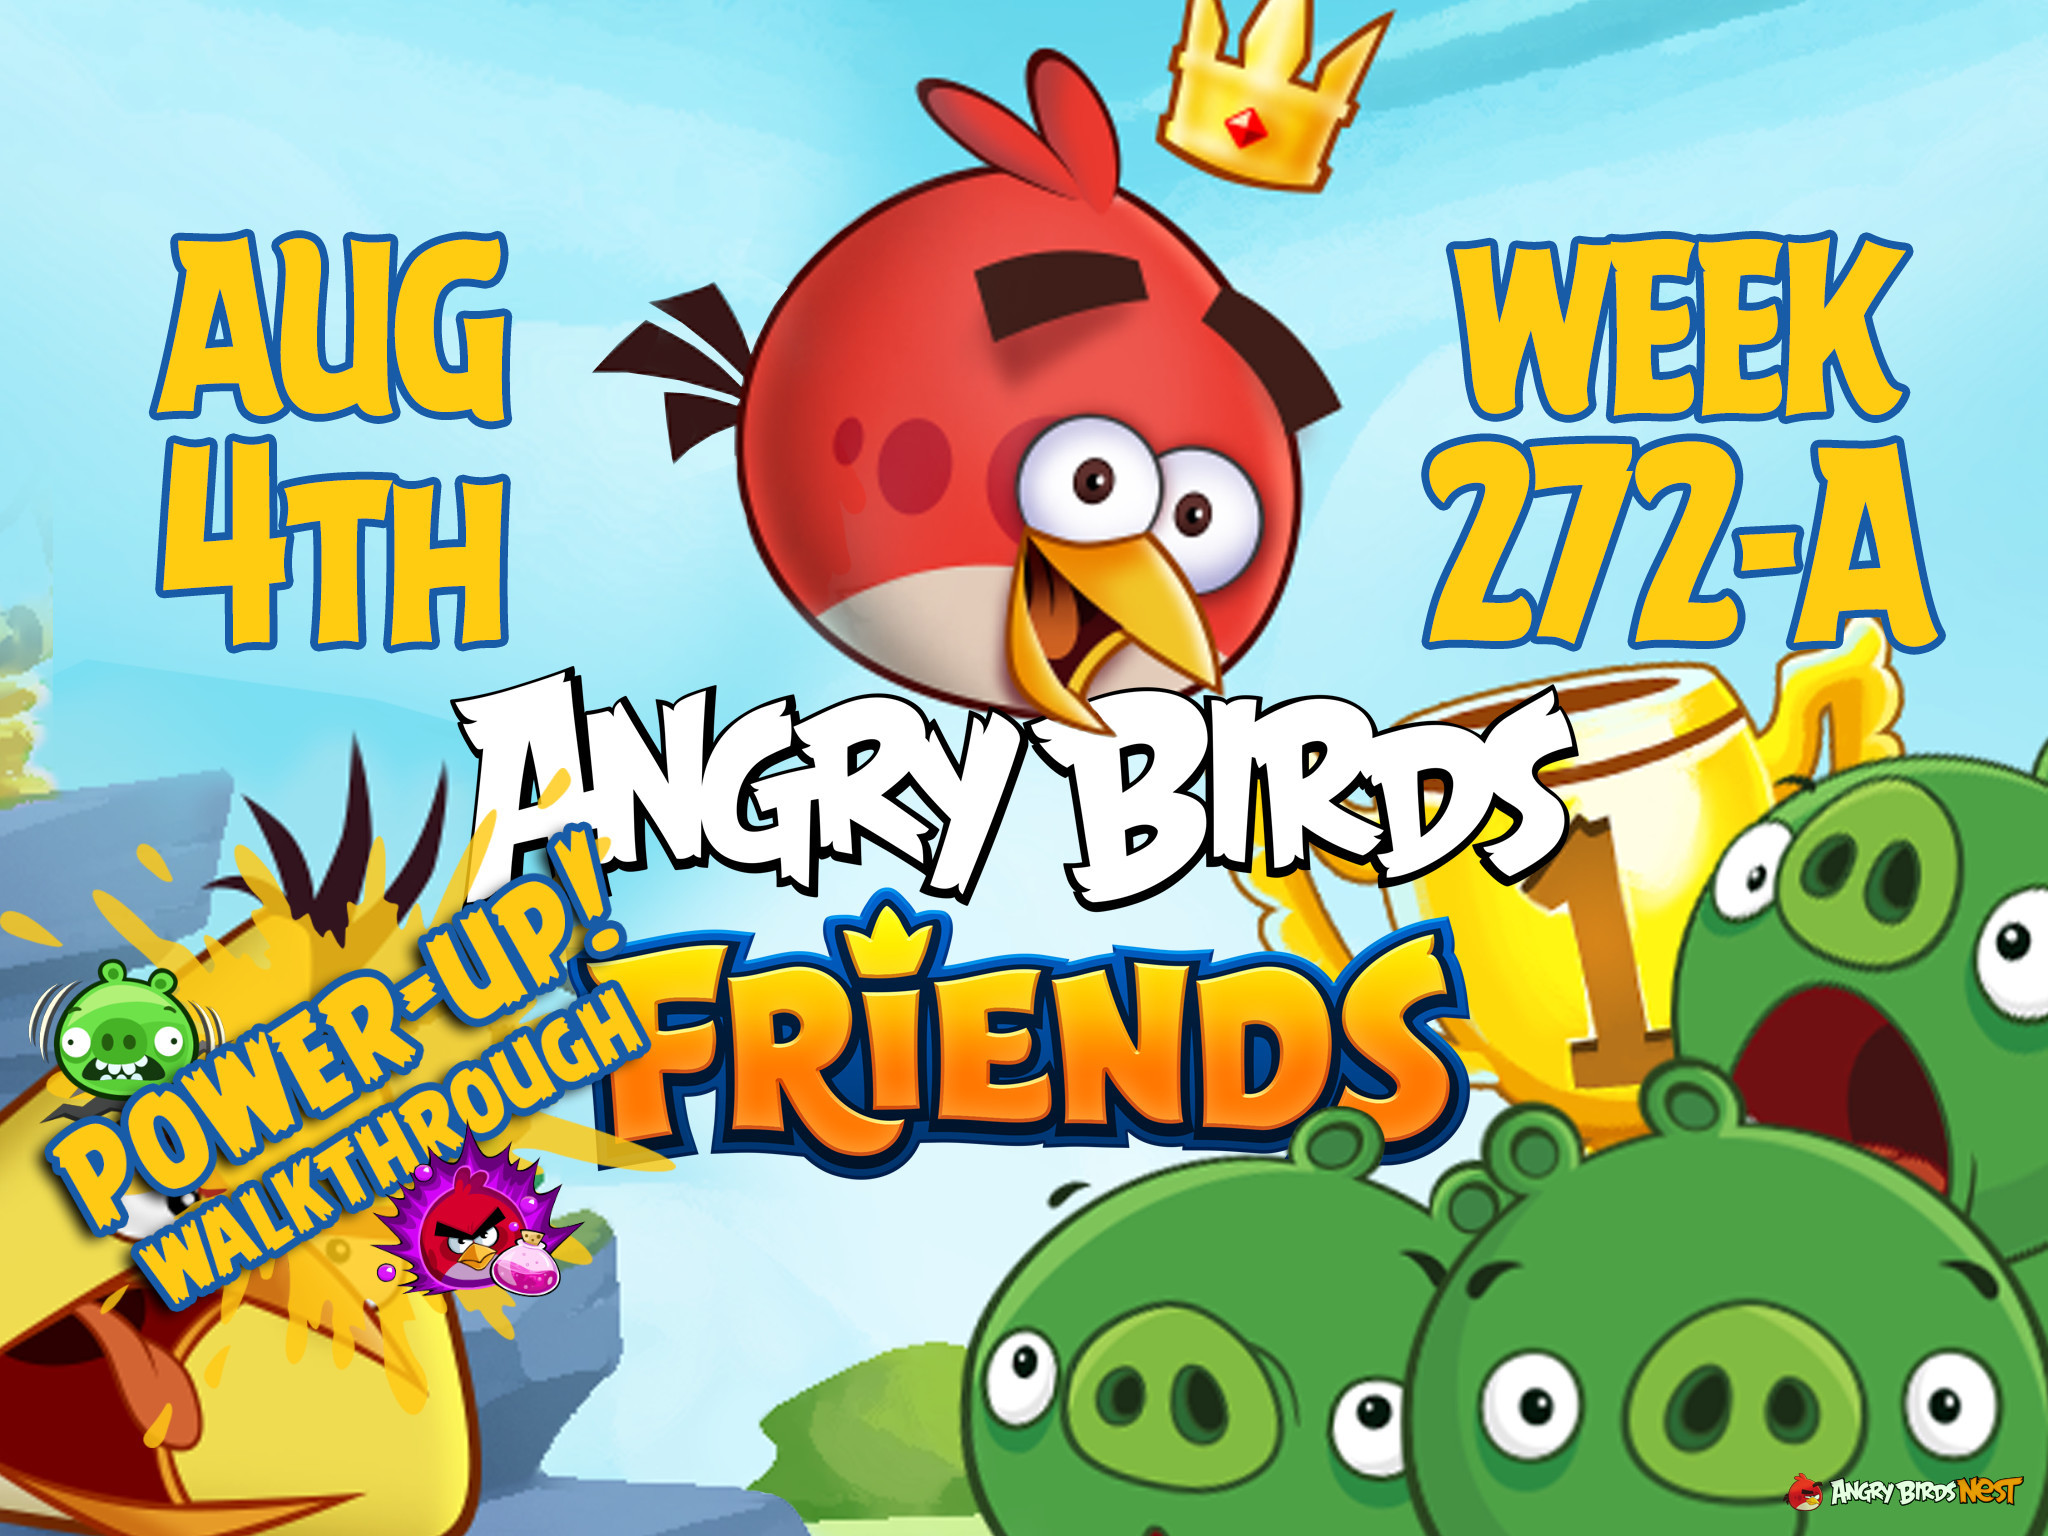 Angry Birds Friends Tournament Week 272-A Feature Image PU